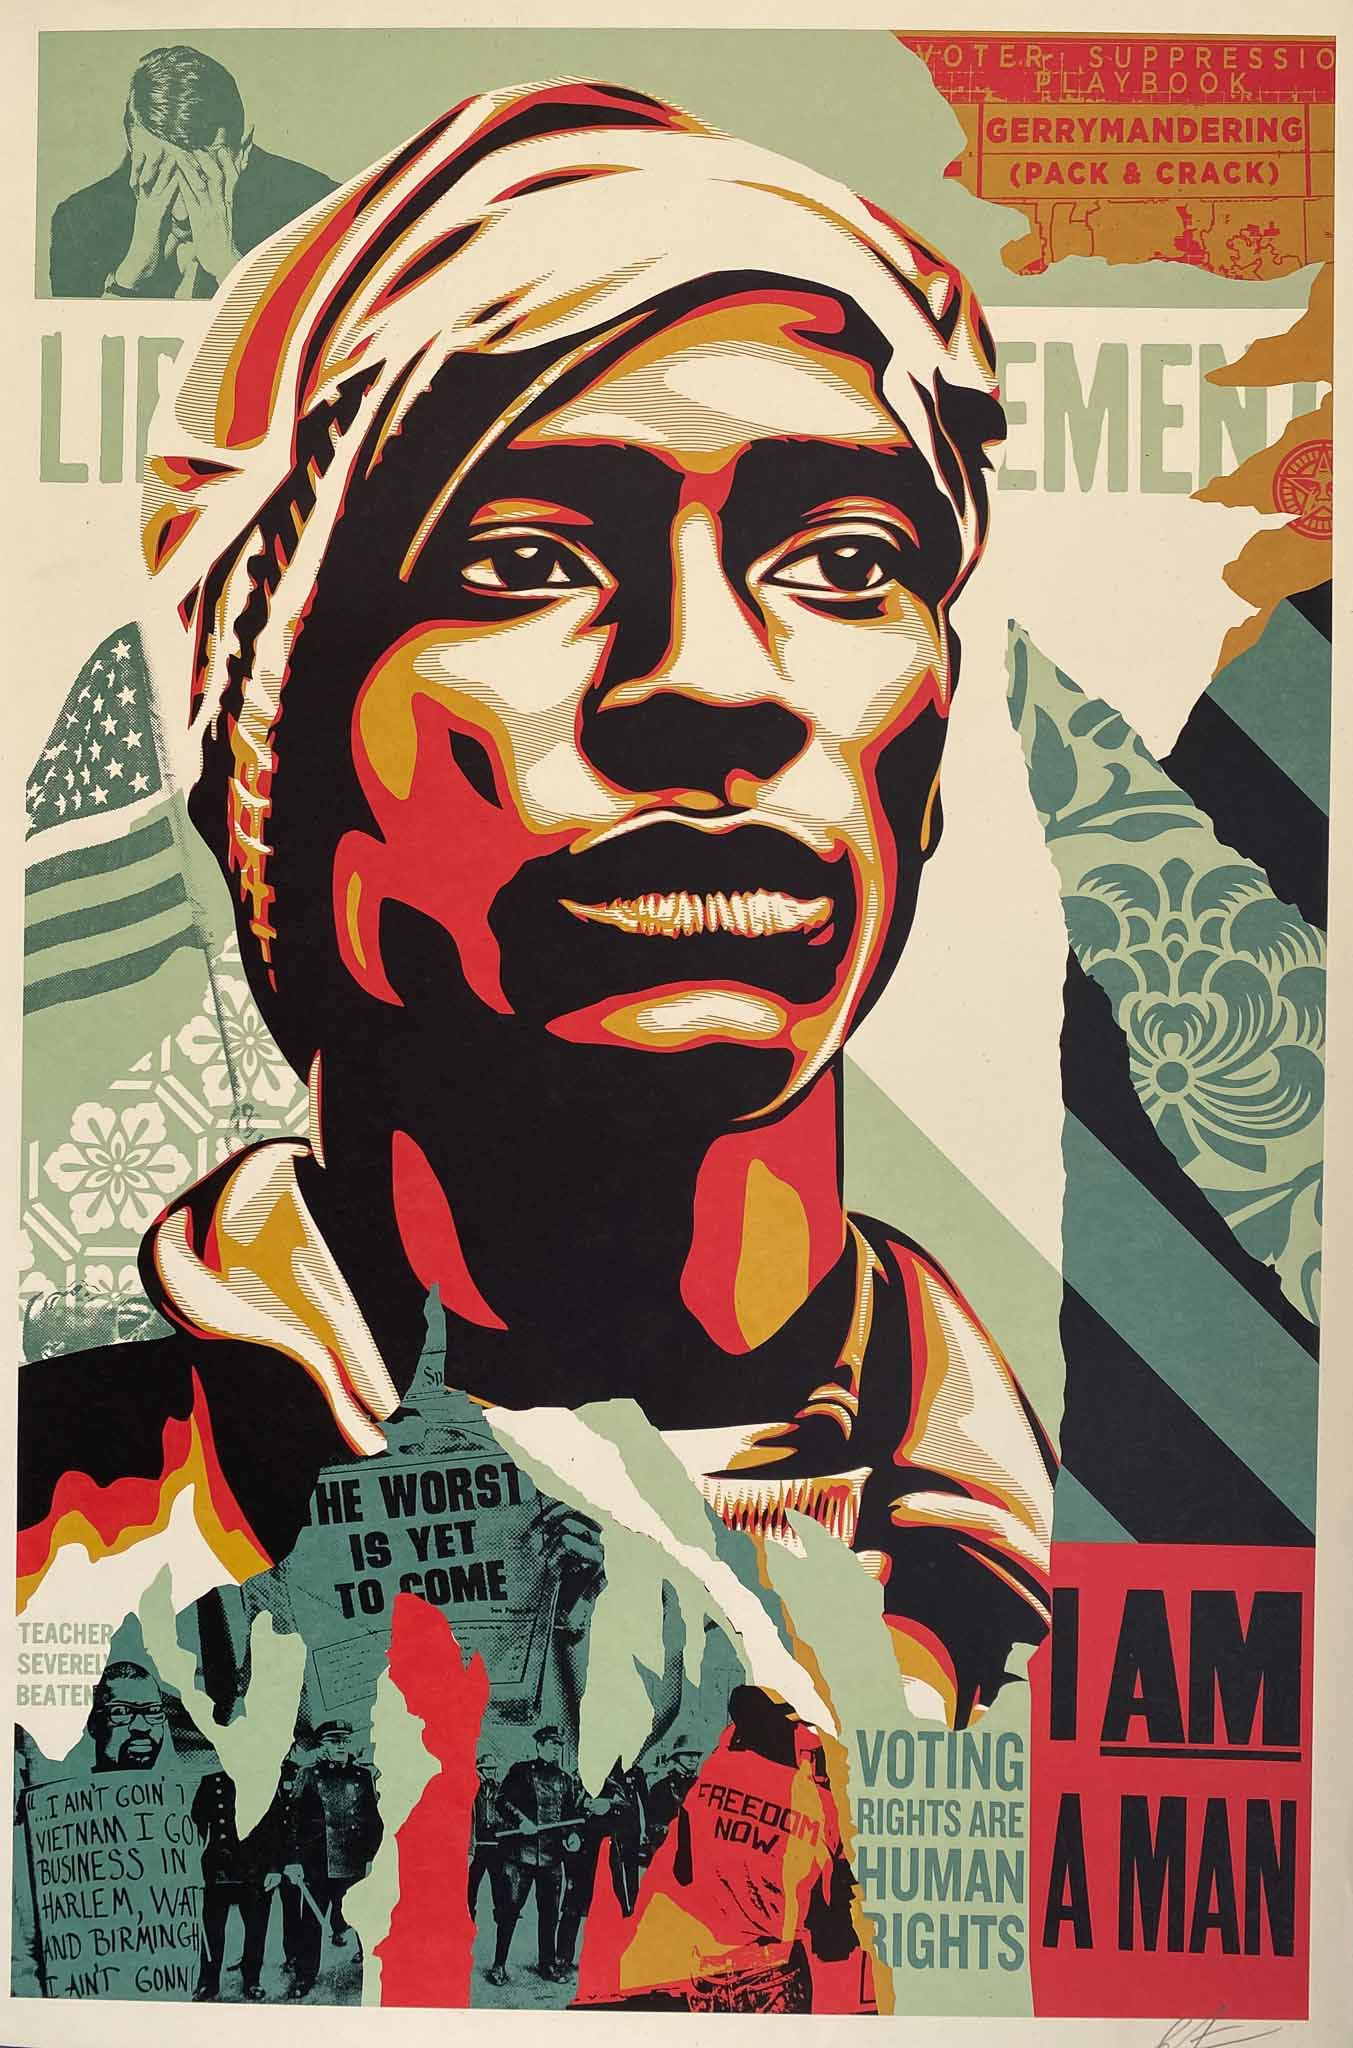 Affiche I Am a Man Voting Right are Human Rights par Shepard Fairey (Obey), 2016